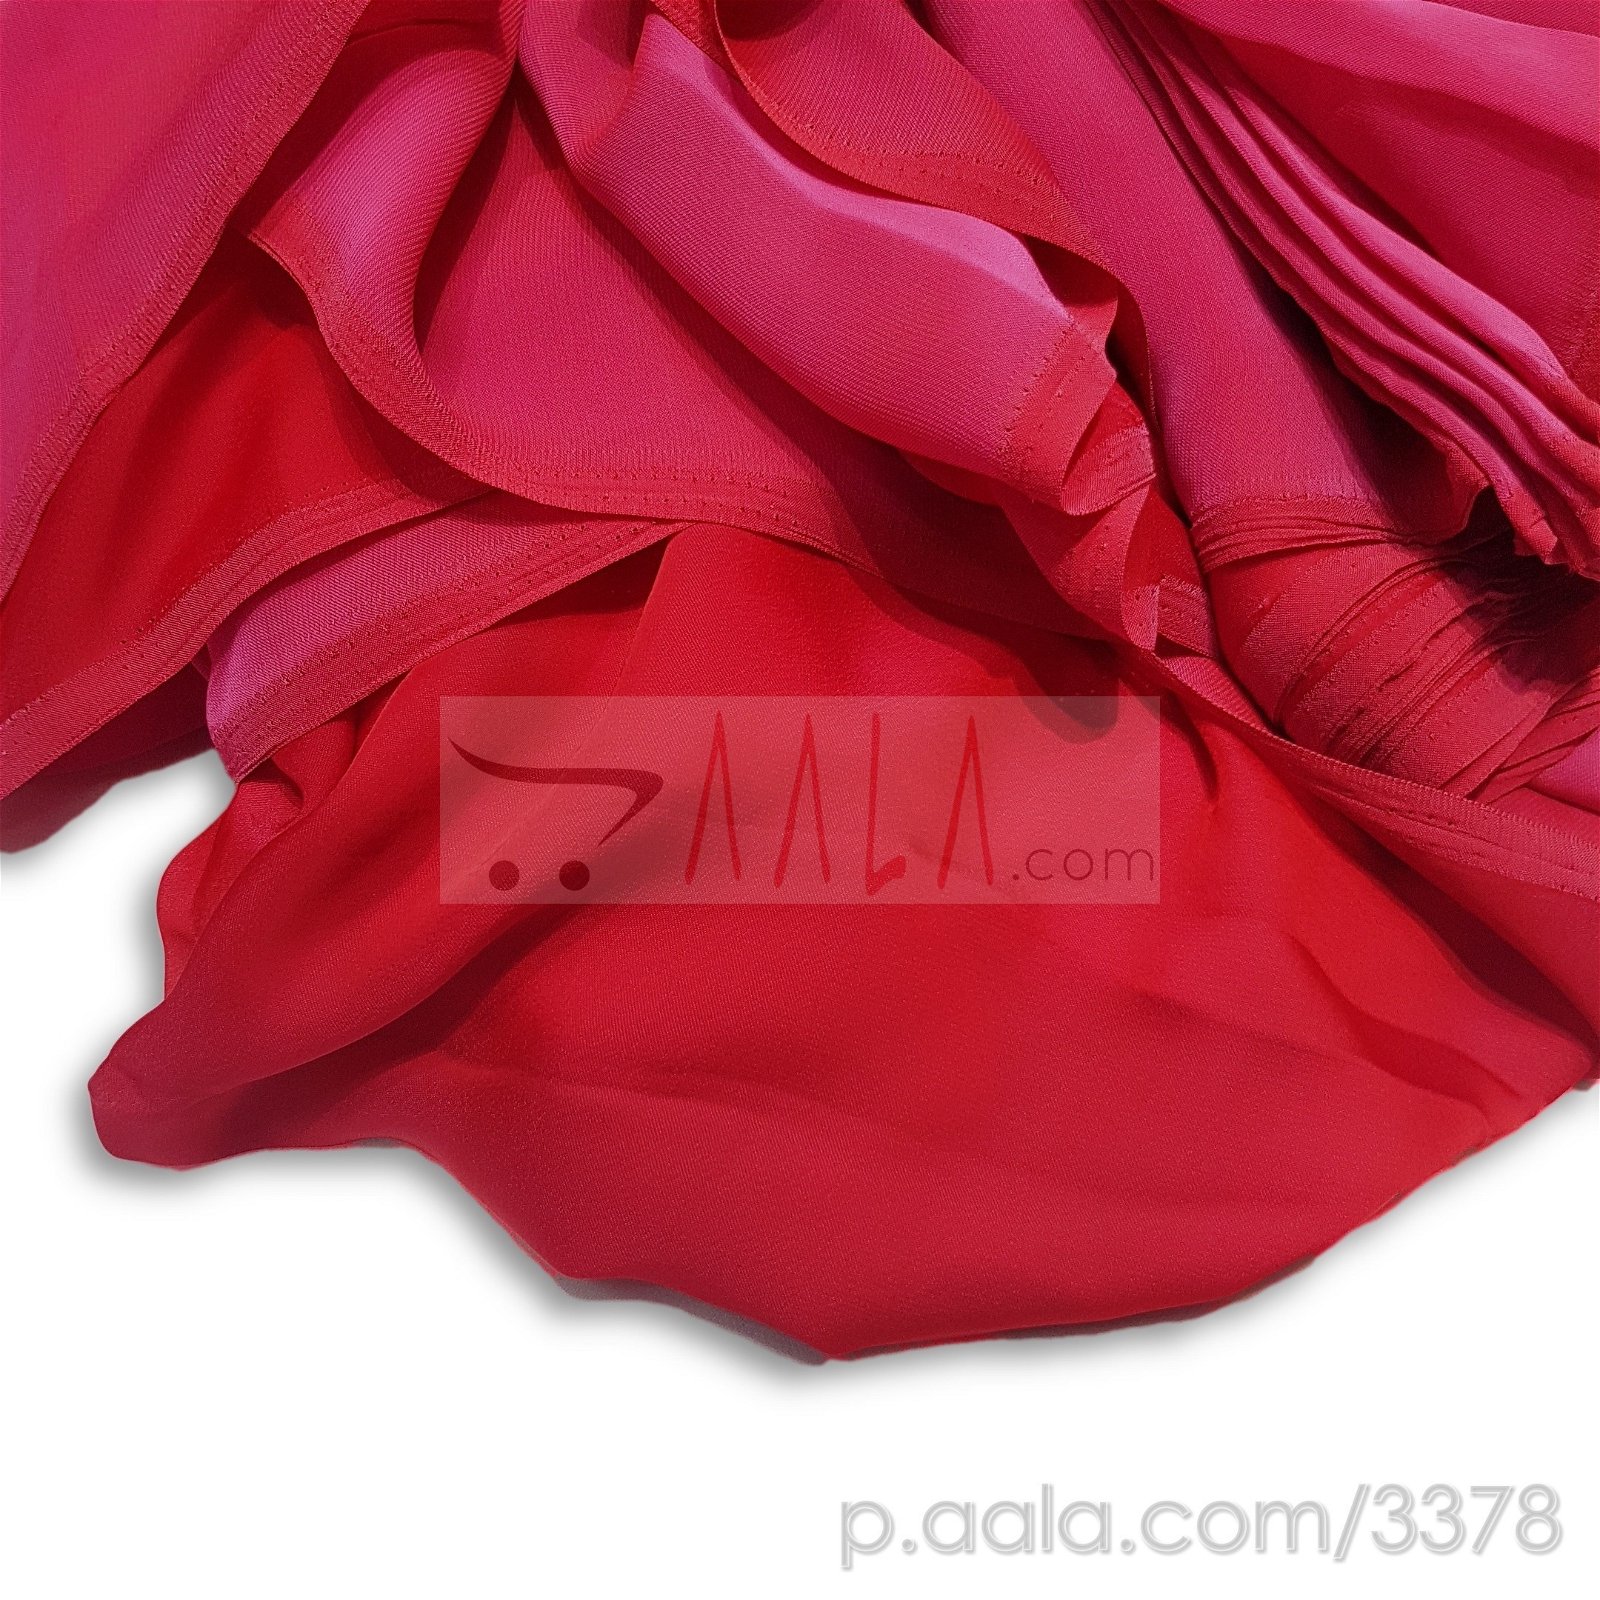 Metallic Satin Georgette Poly-ester 44 Inches Dyed Per Metre #3378